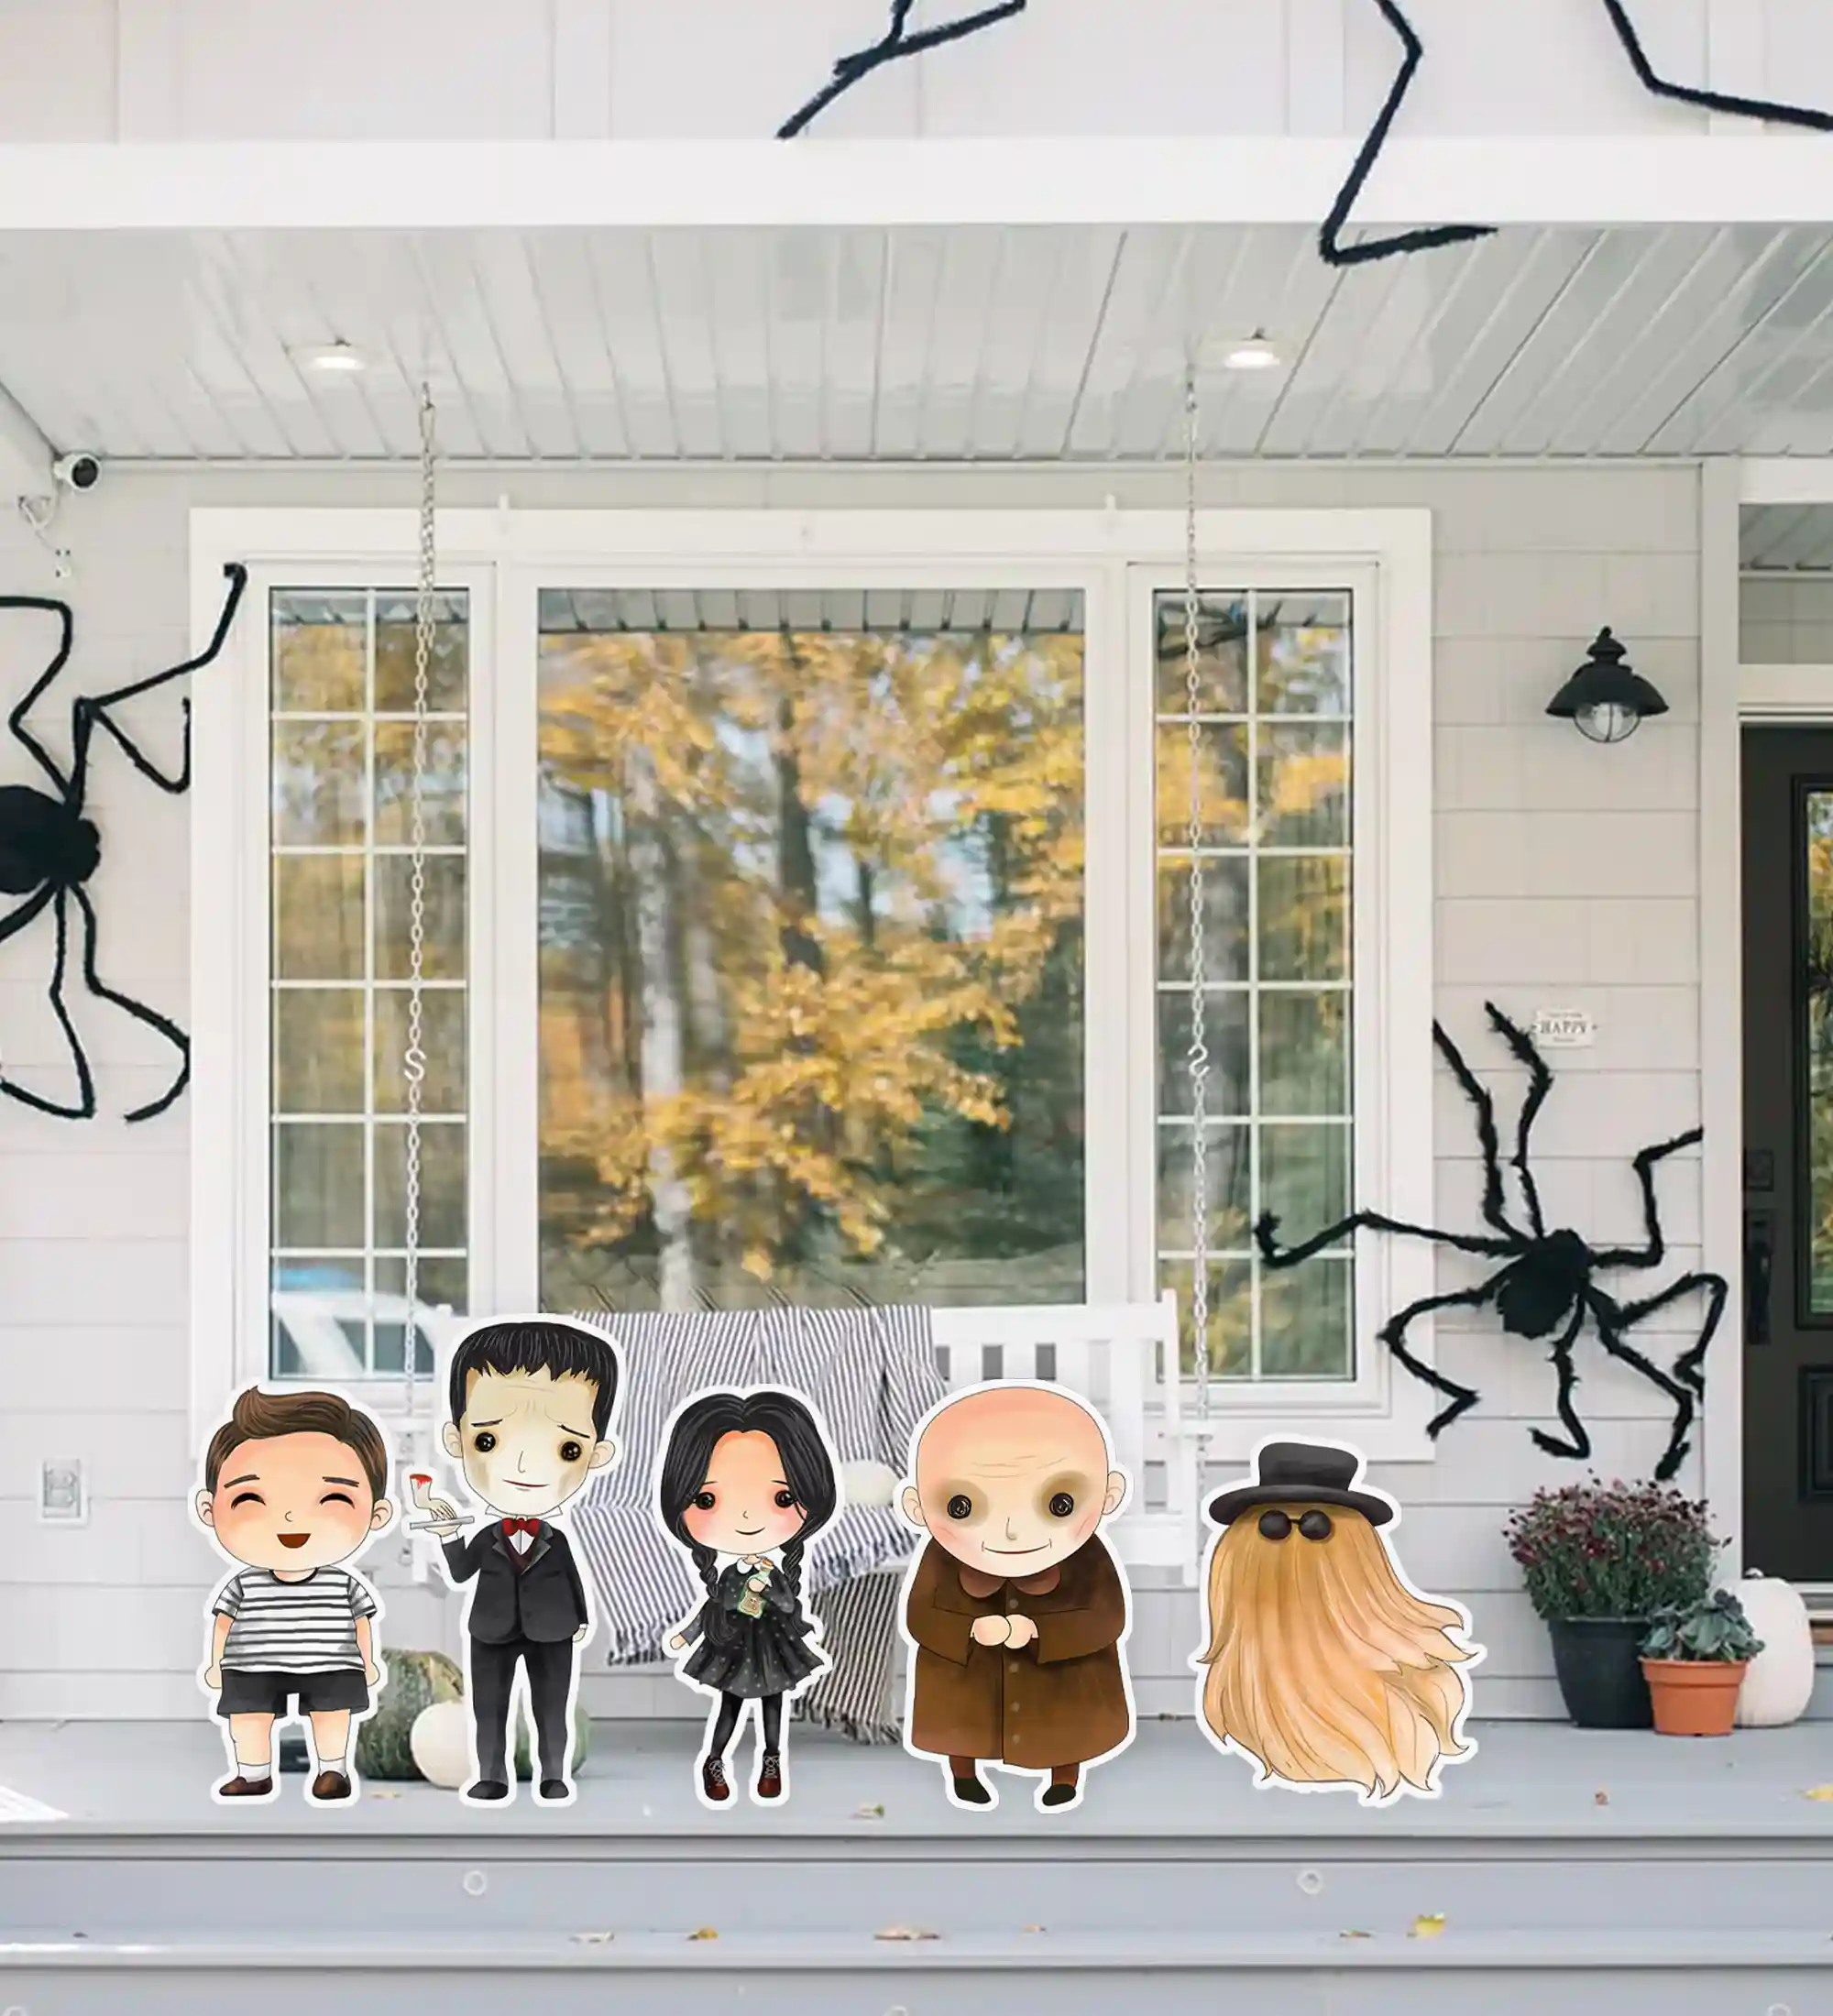 Addams family large decor cutout for decorations. Download the printables for a Wednesday birthday party, Addams Family themed baby shower, or a Wednesday viewing party. Includes all the favorite characters Cousin Itt, Wednesday, Lurch, Uncle Fester, Pugsley, Thing